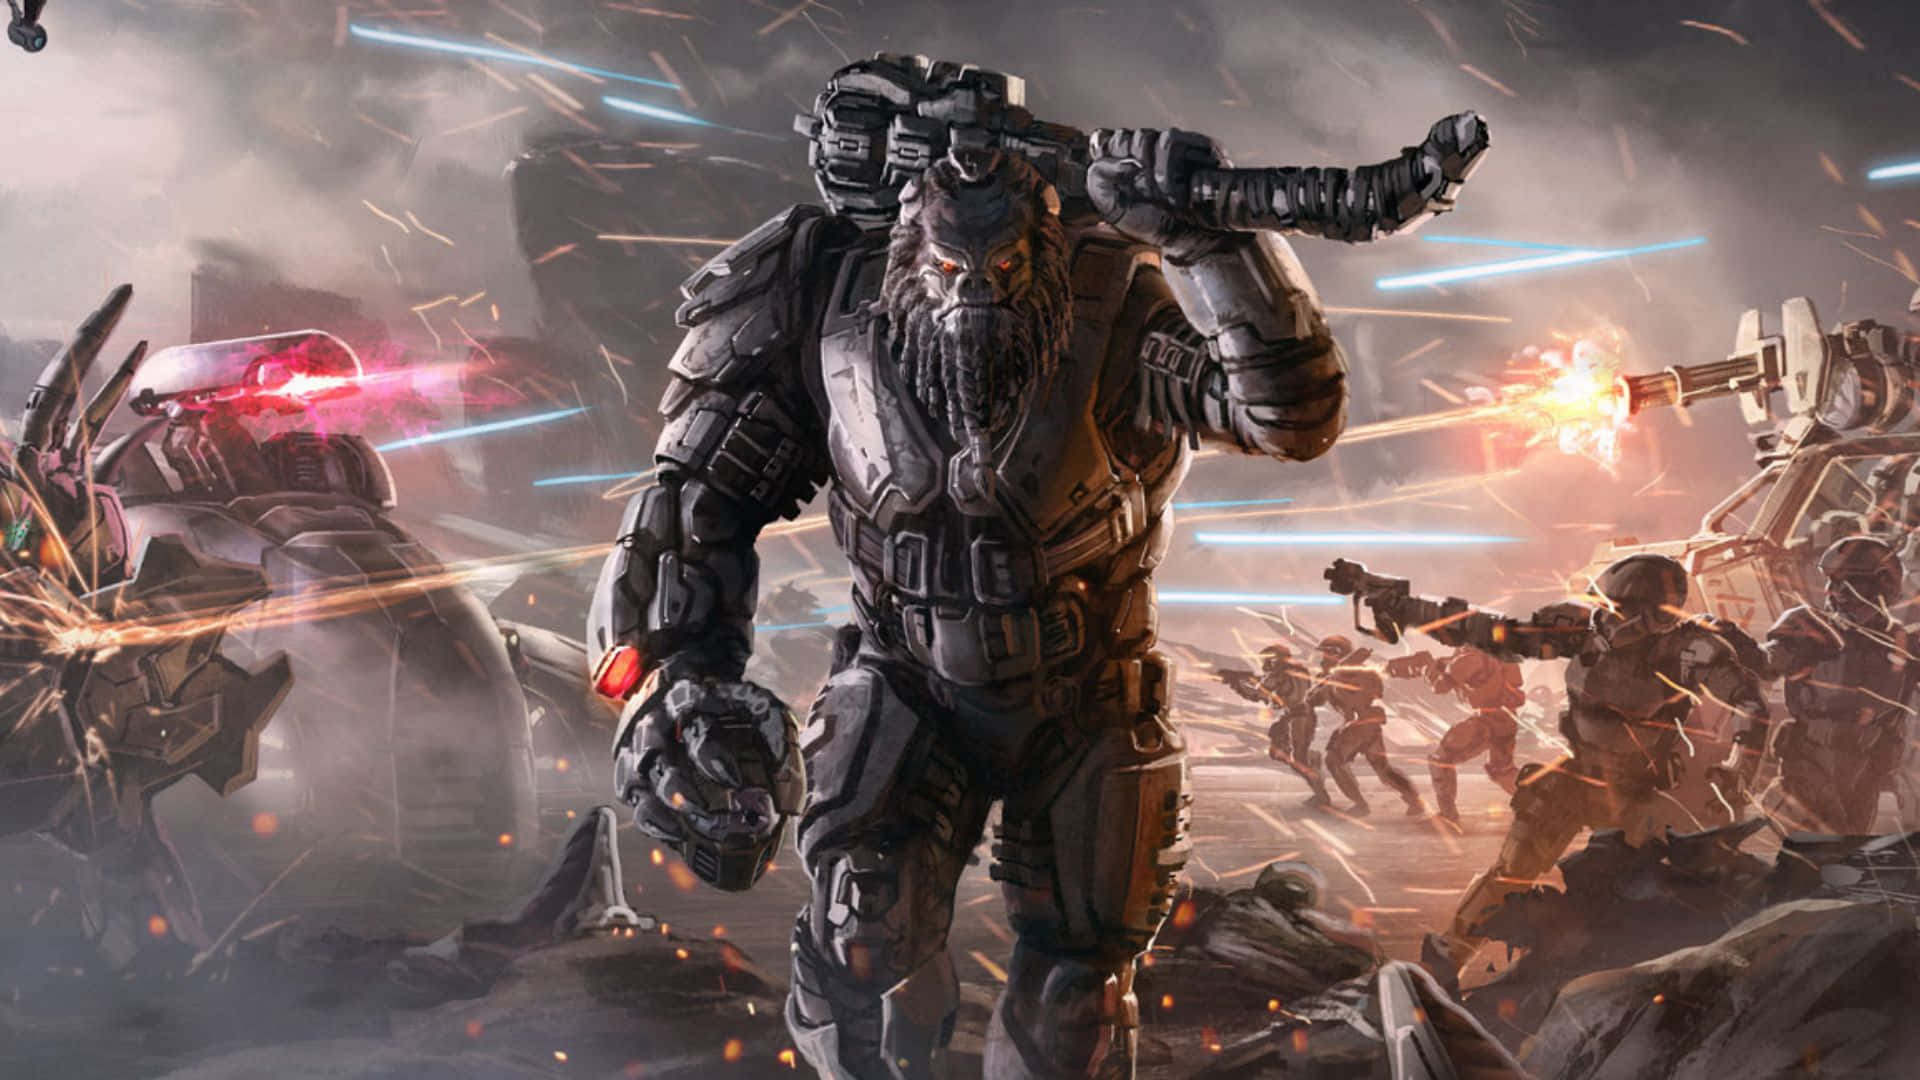 Caption: Atriox, The Brutal Warlord Wallpaper